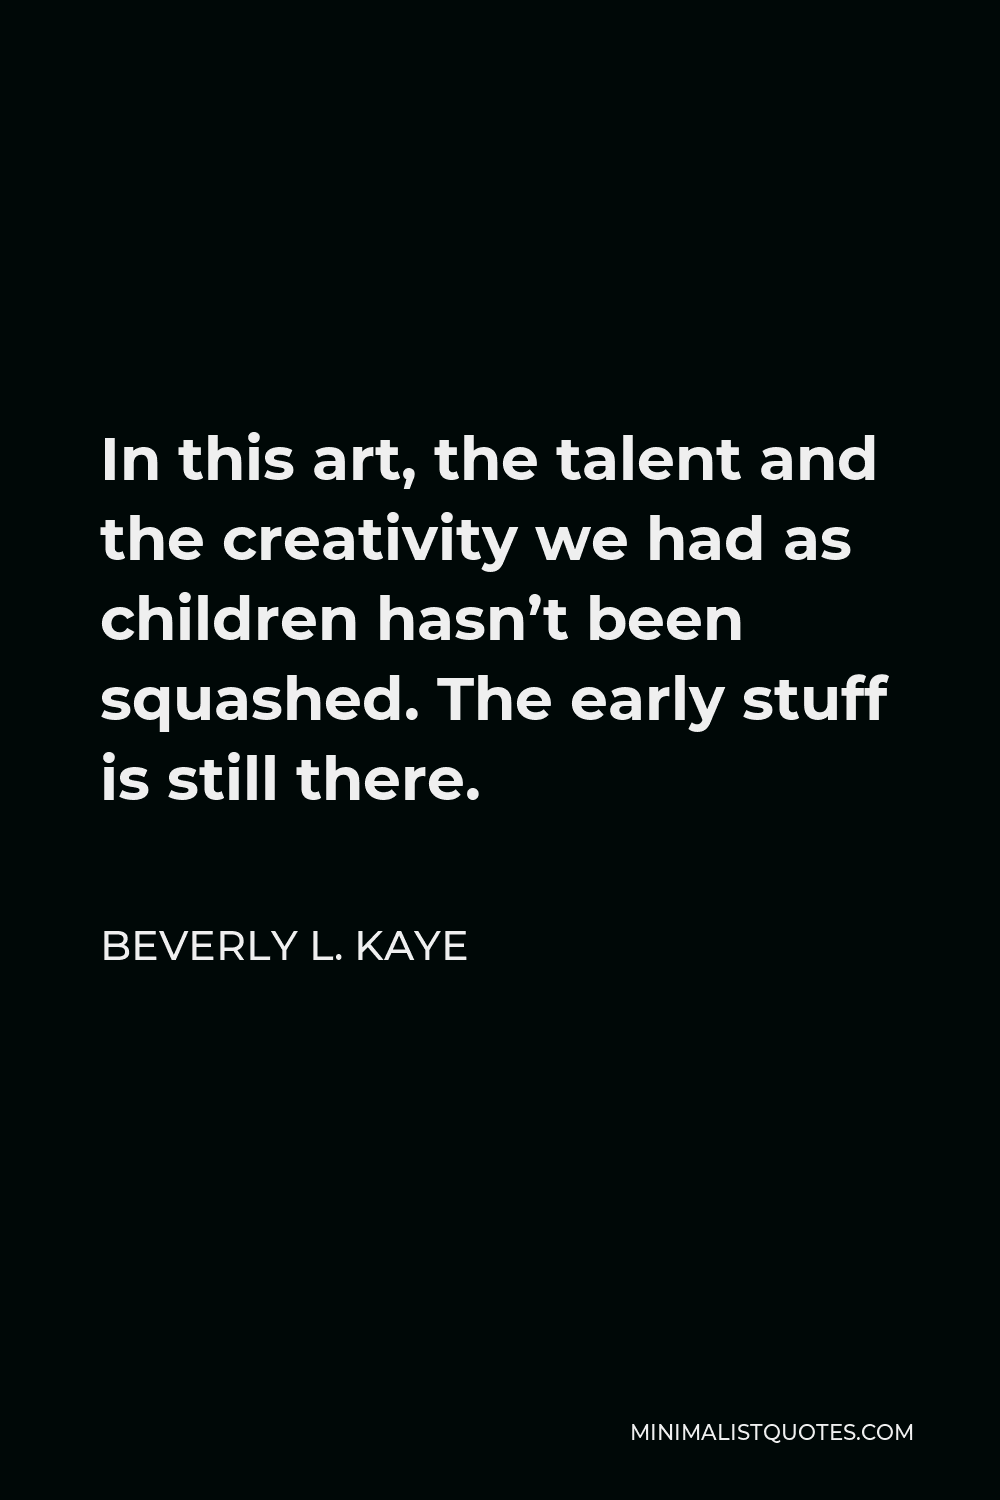 Beverly L. Kaye Quote - In this art, the talent and the creativity we had as children hasn’t been squashed. The early stuff is still there.